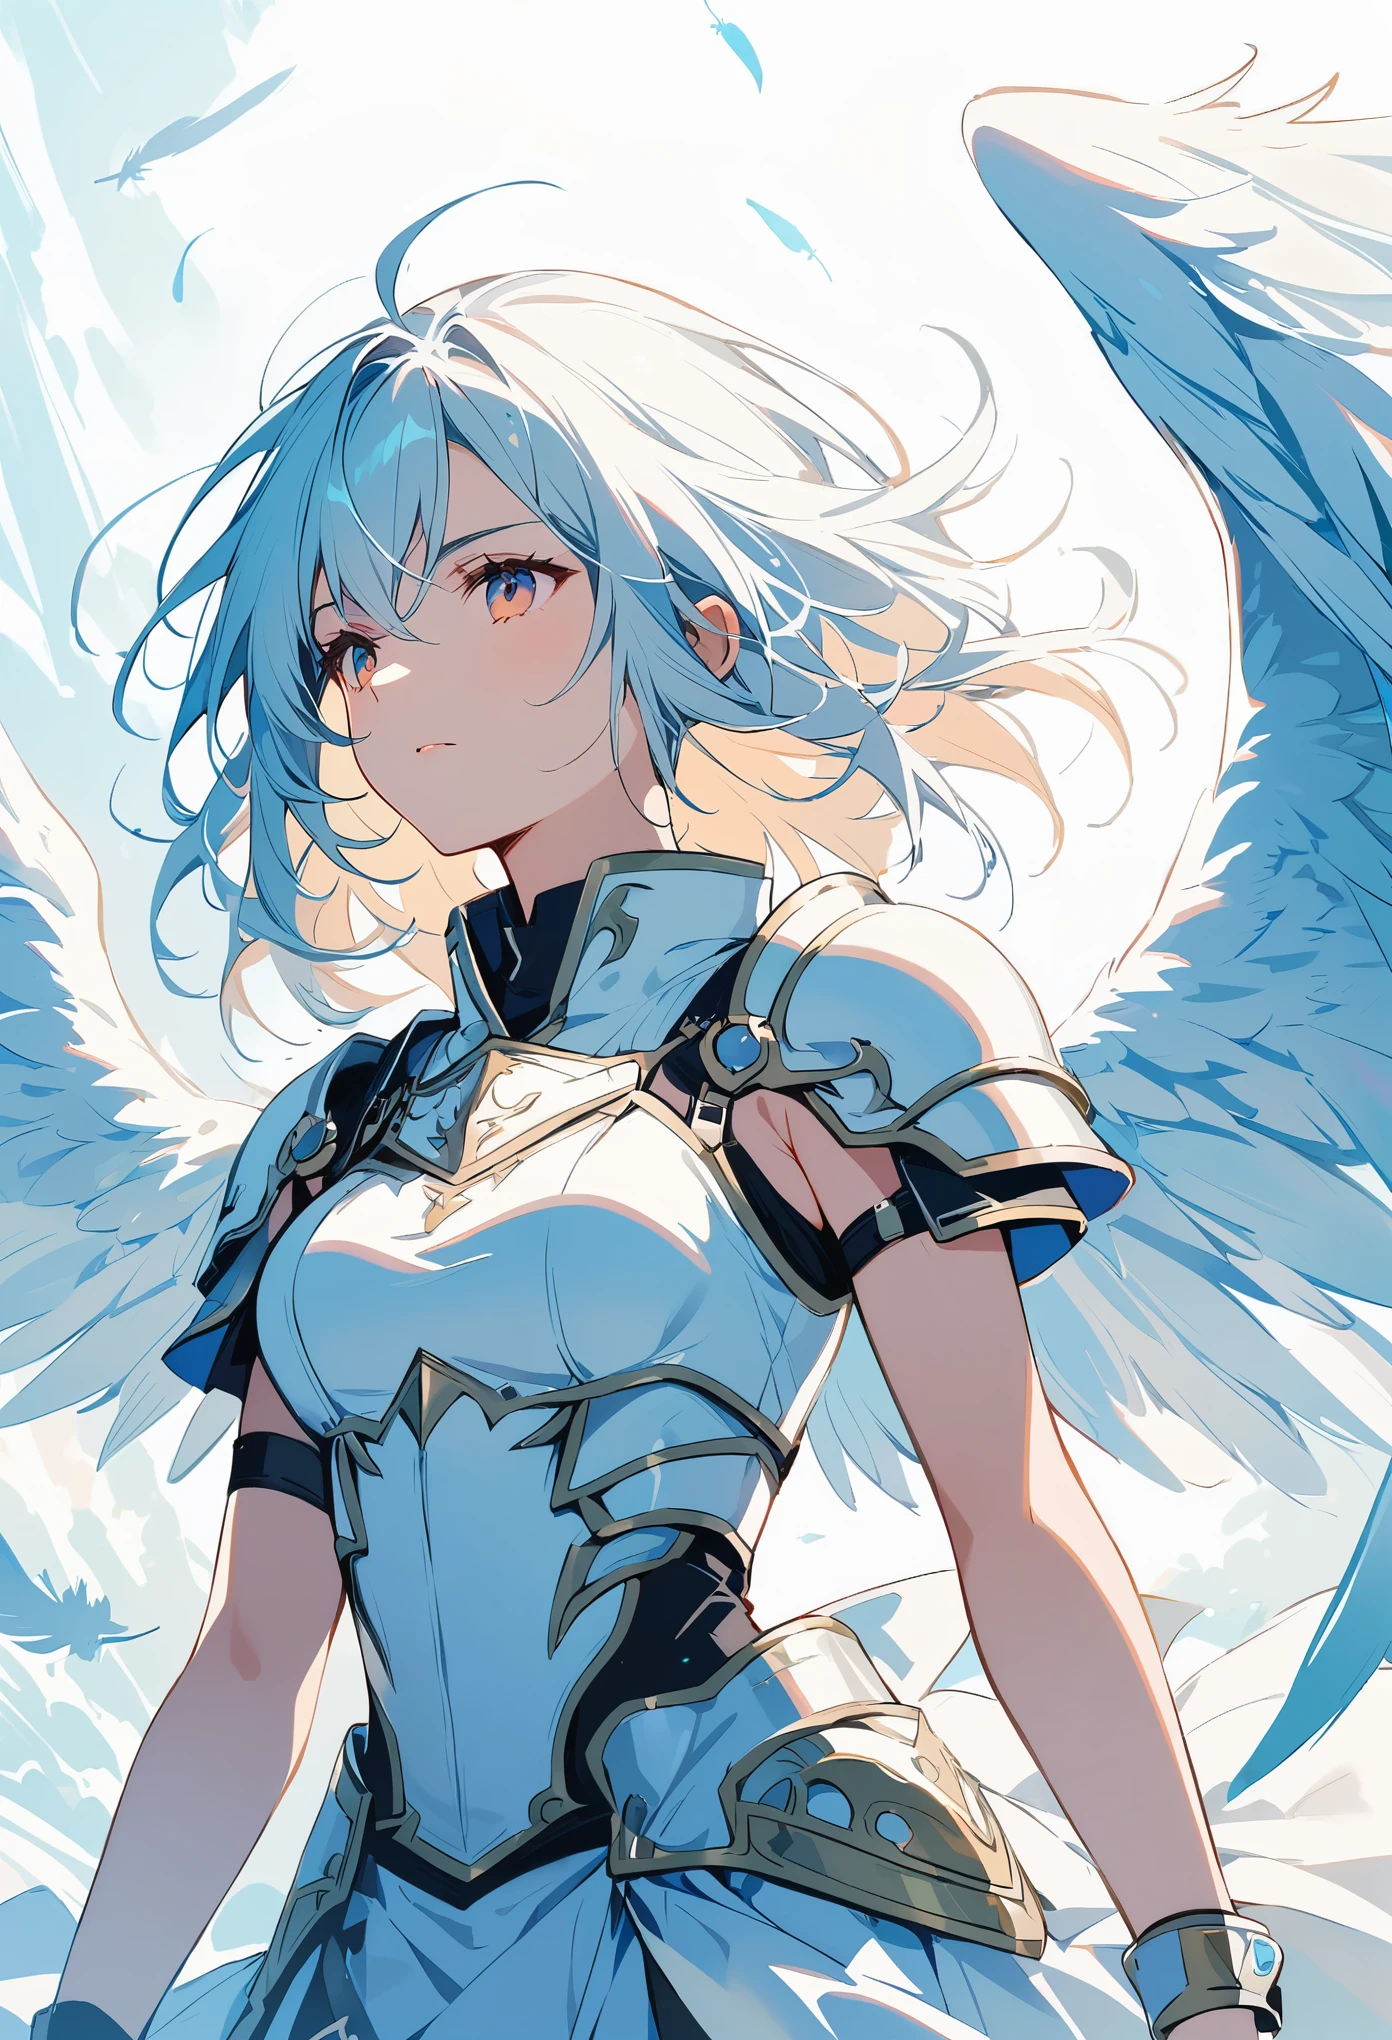 1girl angel angel_wings armor feathers_long wing feathers_hair shoulder armor shoulder_Armor single_wing solo upper part_The body is white_Theme white_wings wings